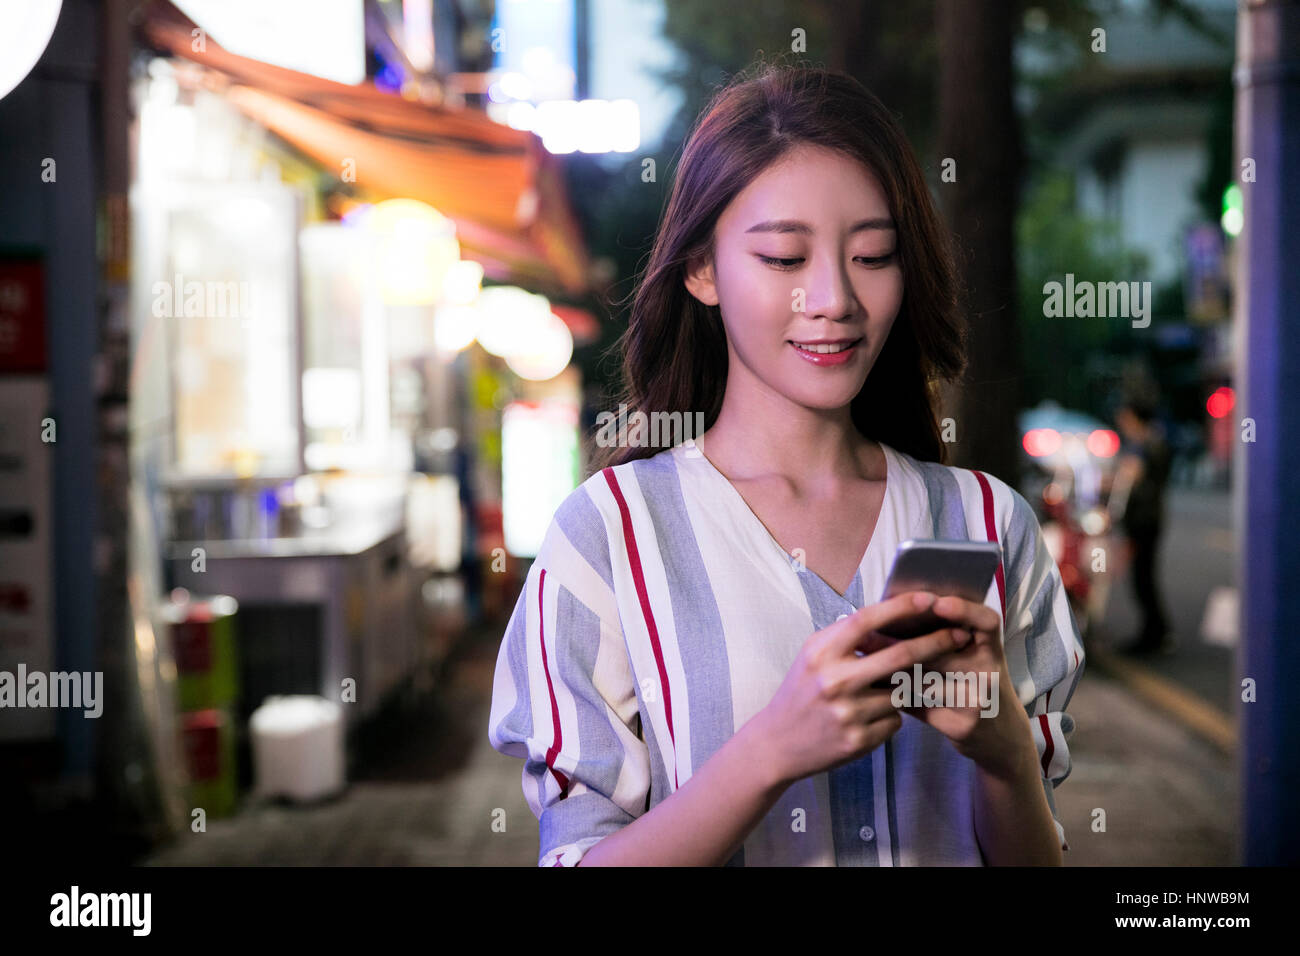 Young woman using cellphone Stock Photo